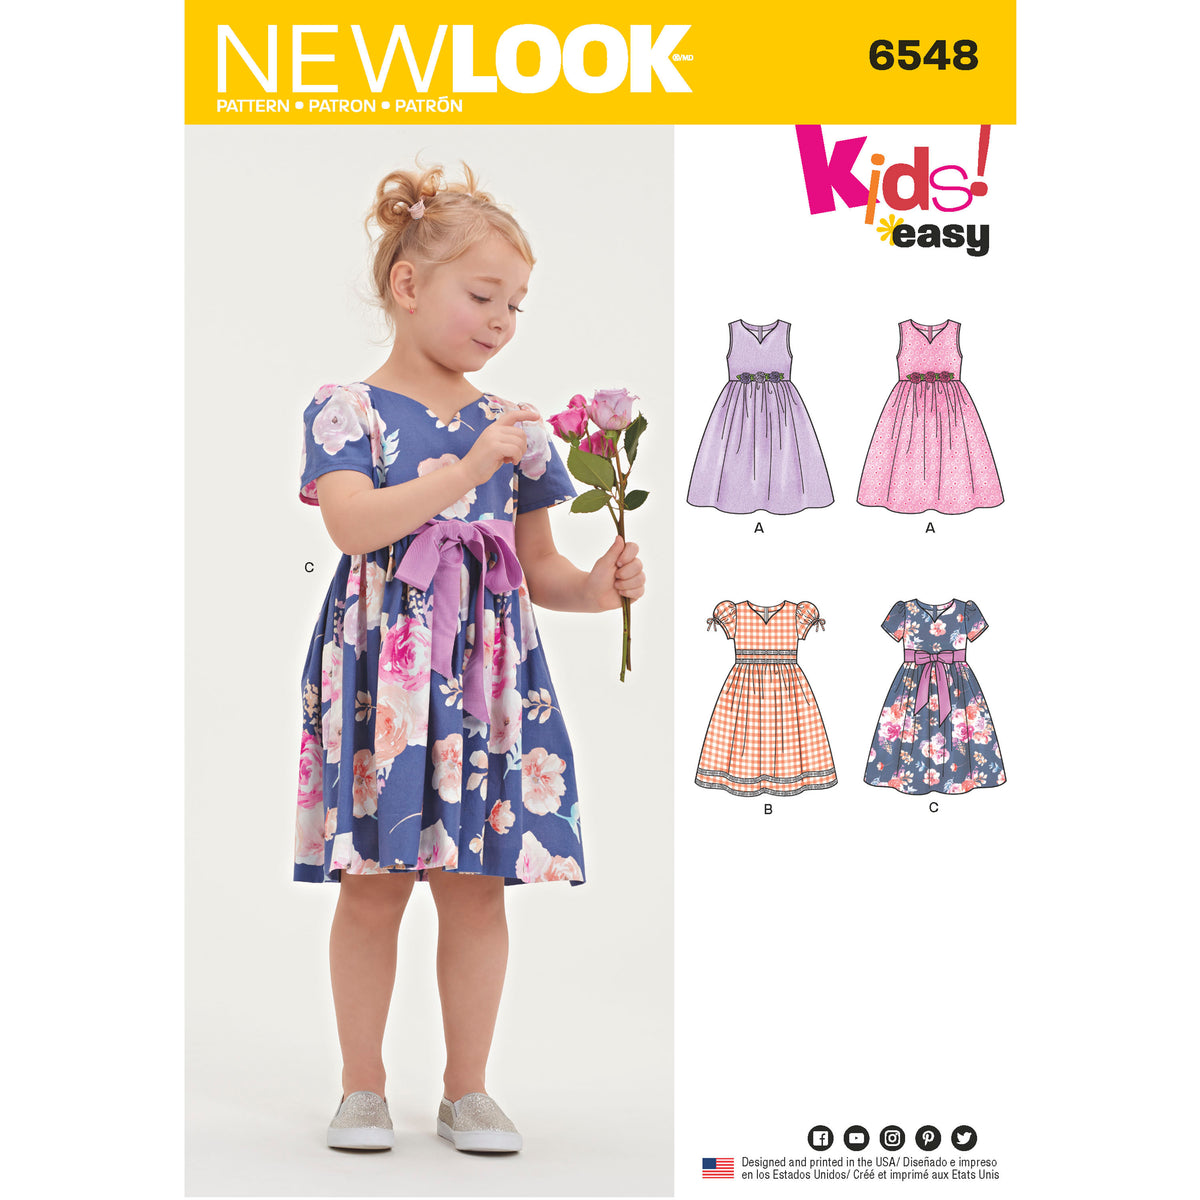 6548 New Look Pattern 6548 Child's Party Dress